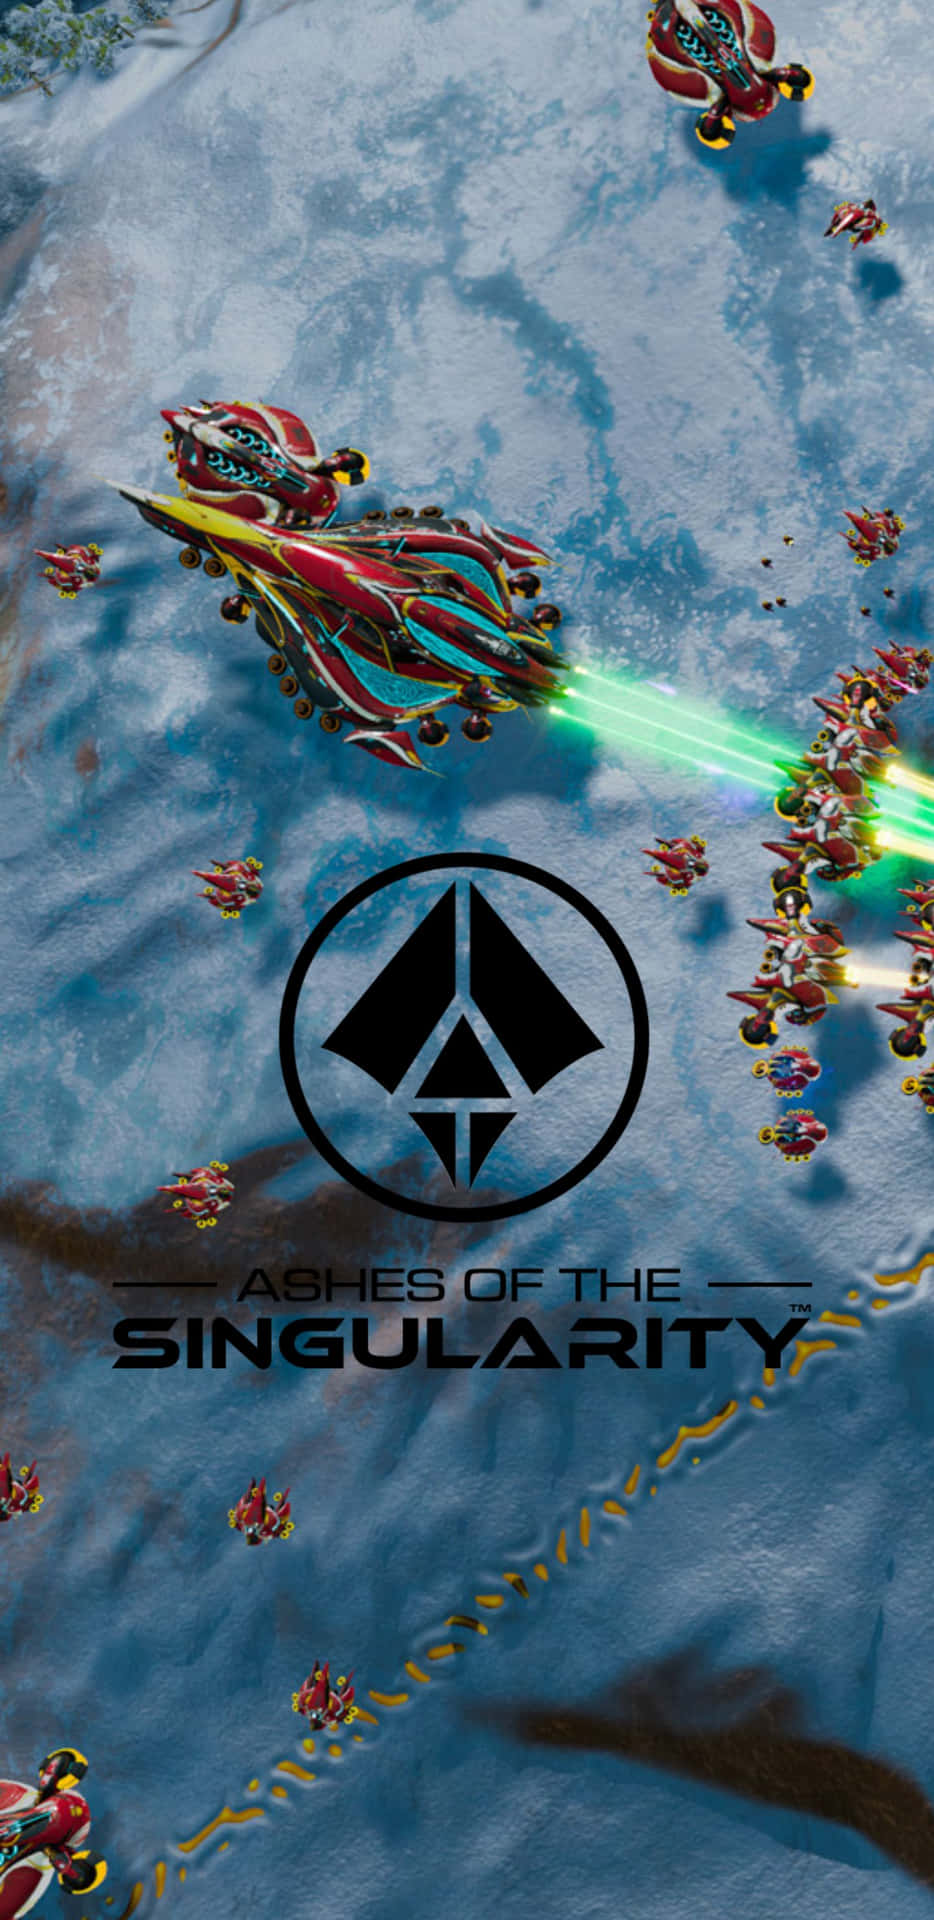 "An intense game of Ashes Of The Singularity on the Pixel 3XL"